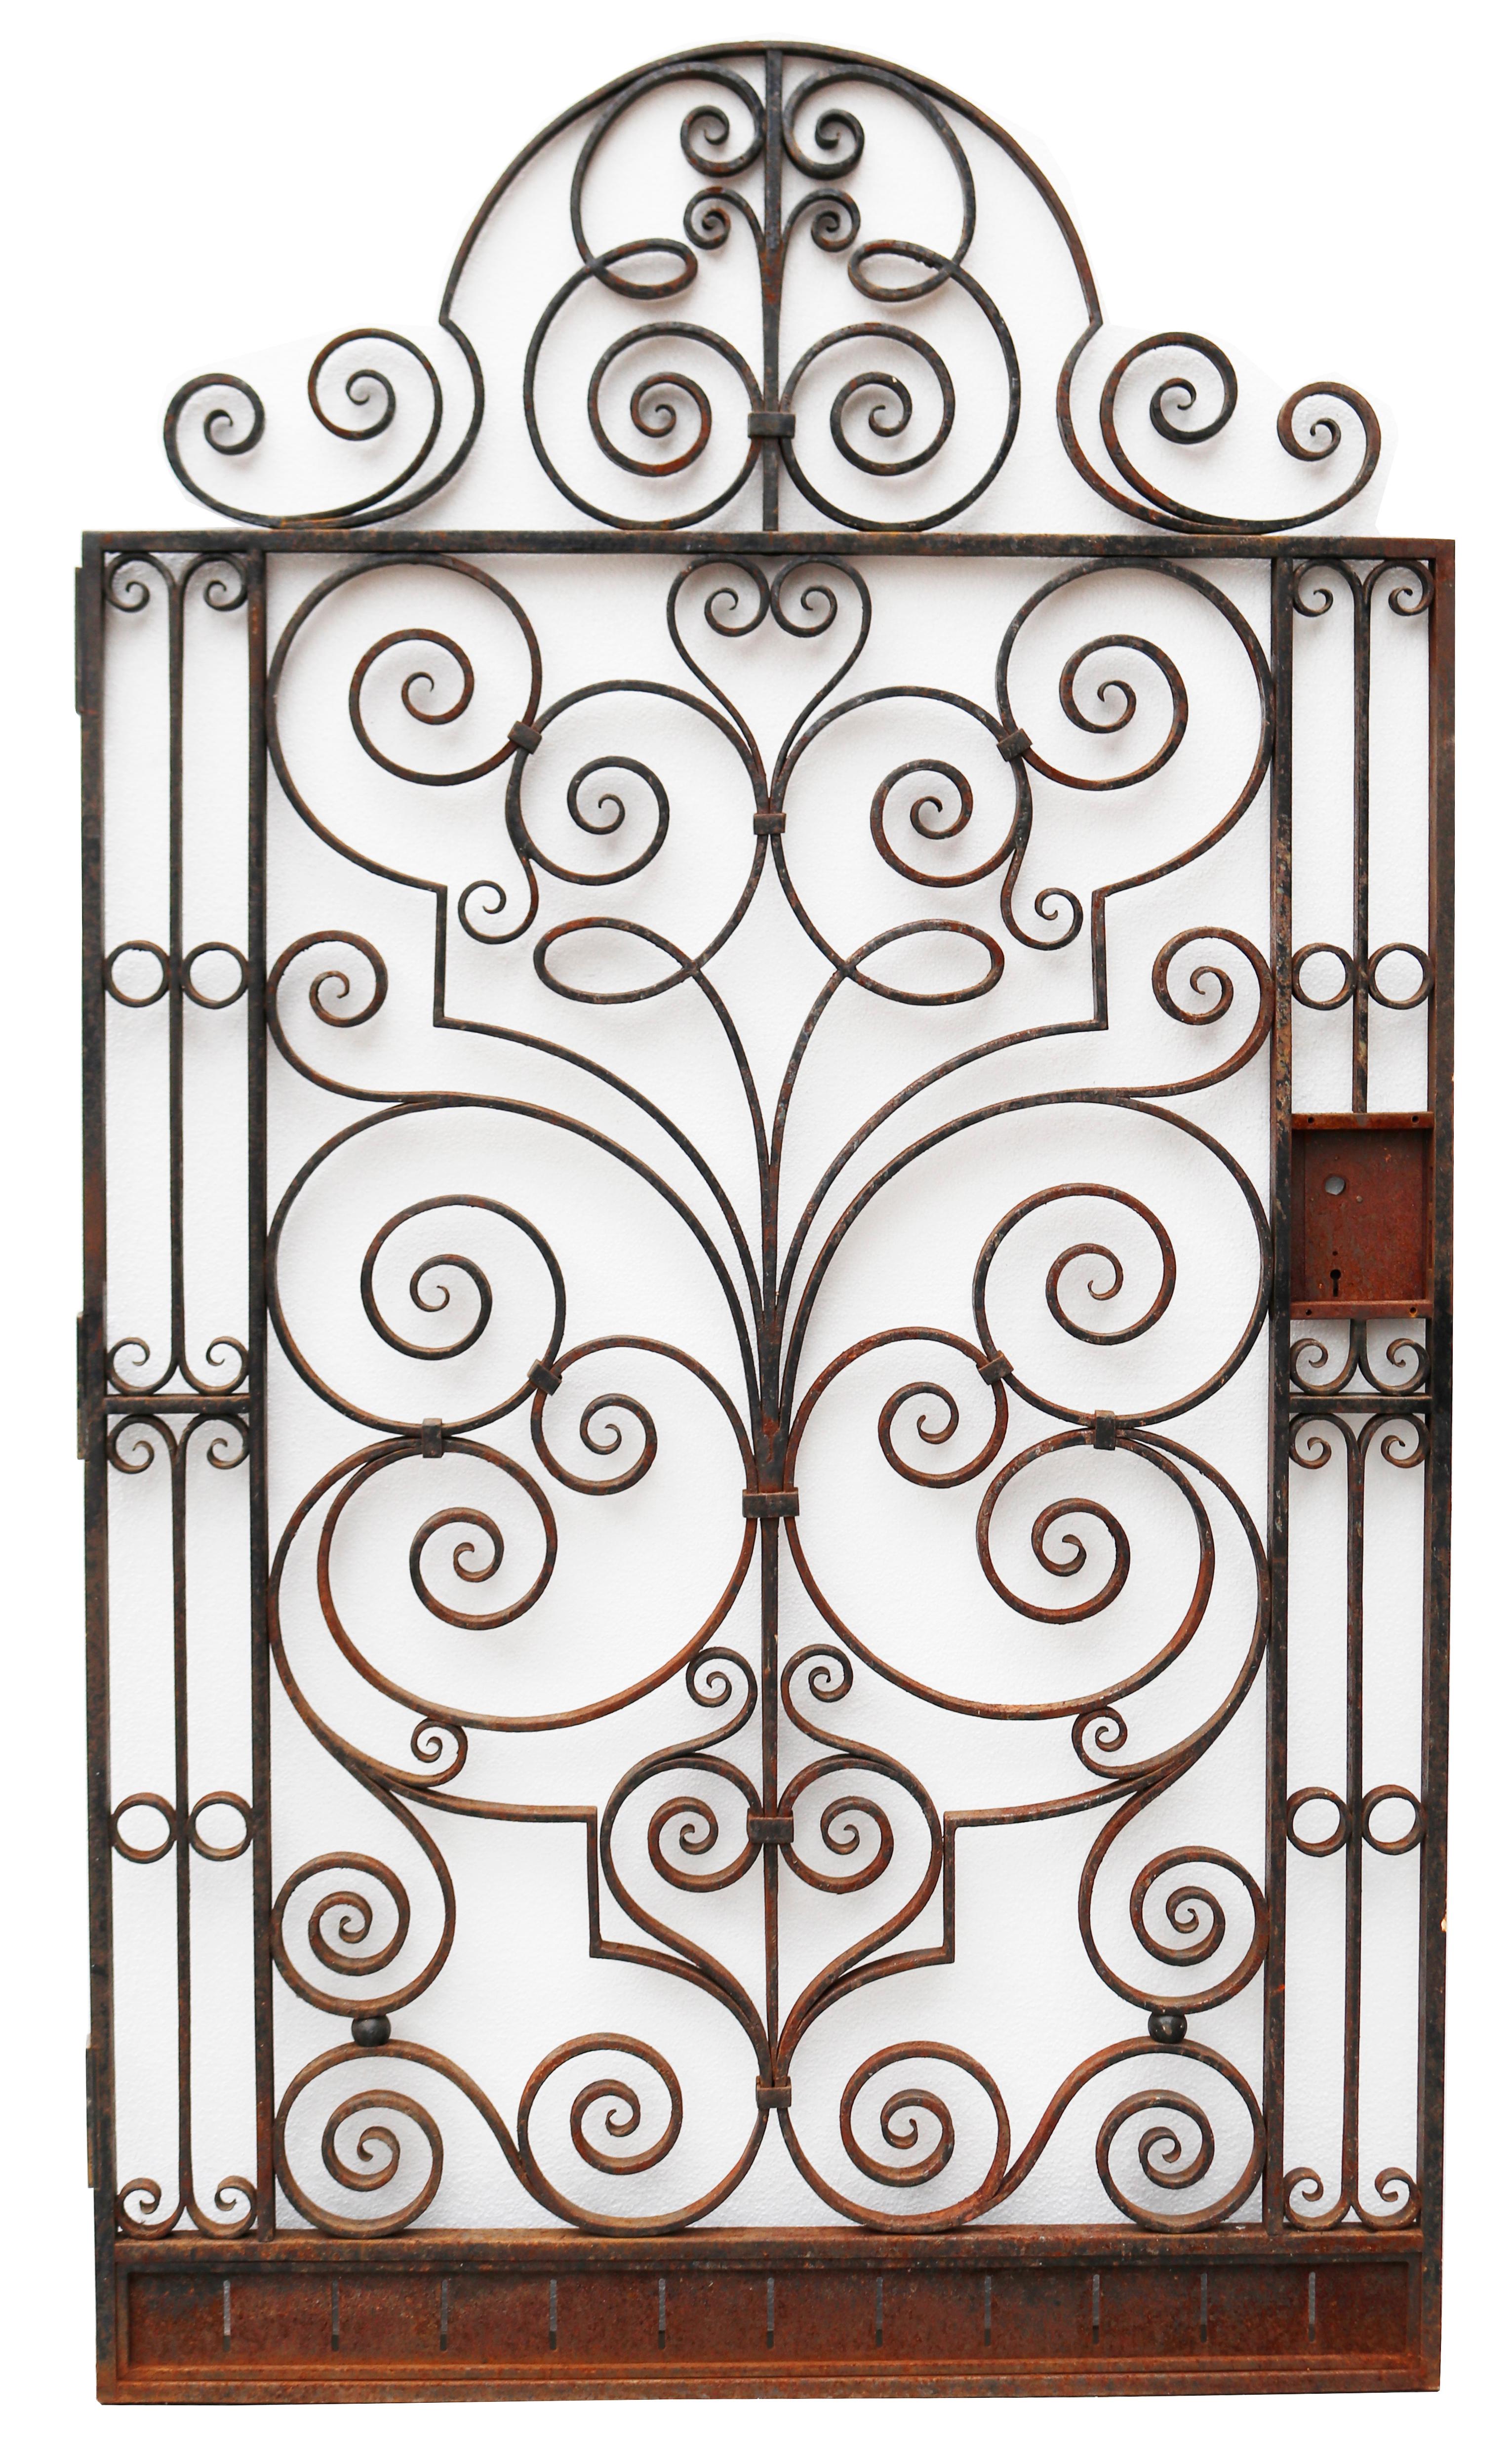 19th Century Antique Wrought Iron Pedestrian Gate For Sale